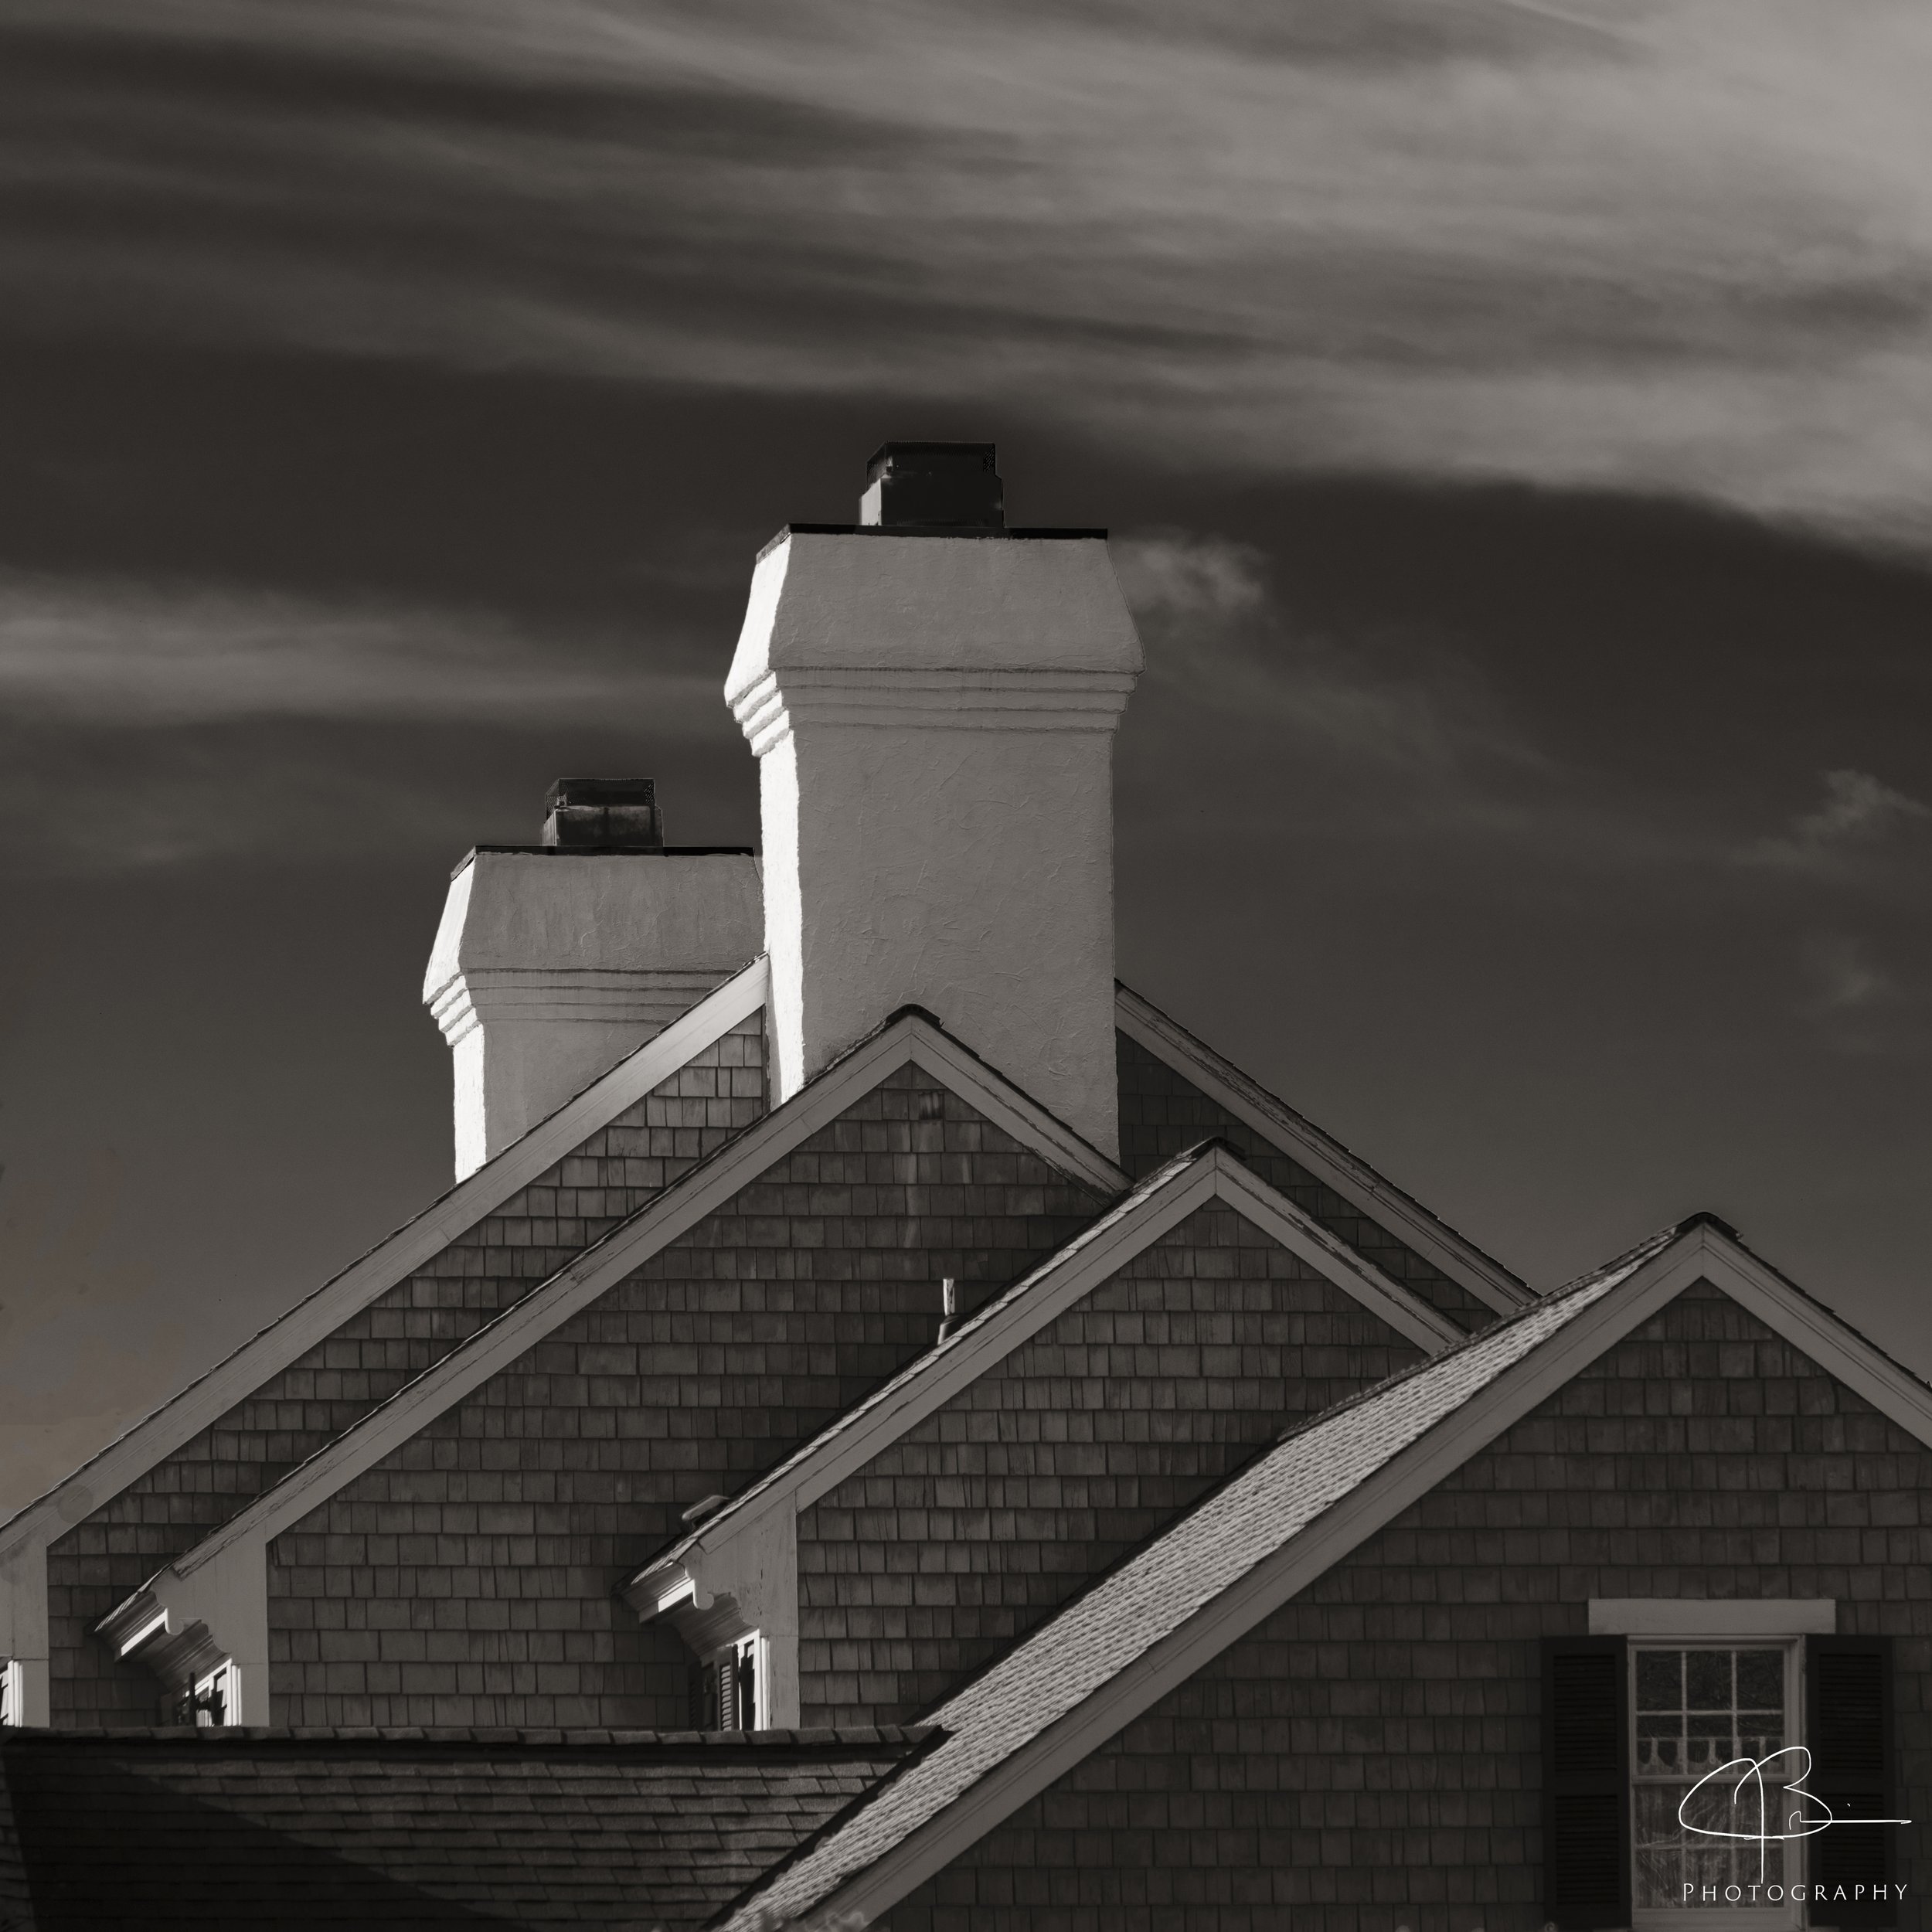 Roofs, Chimneys and Clouds